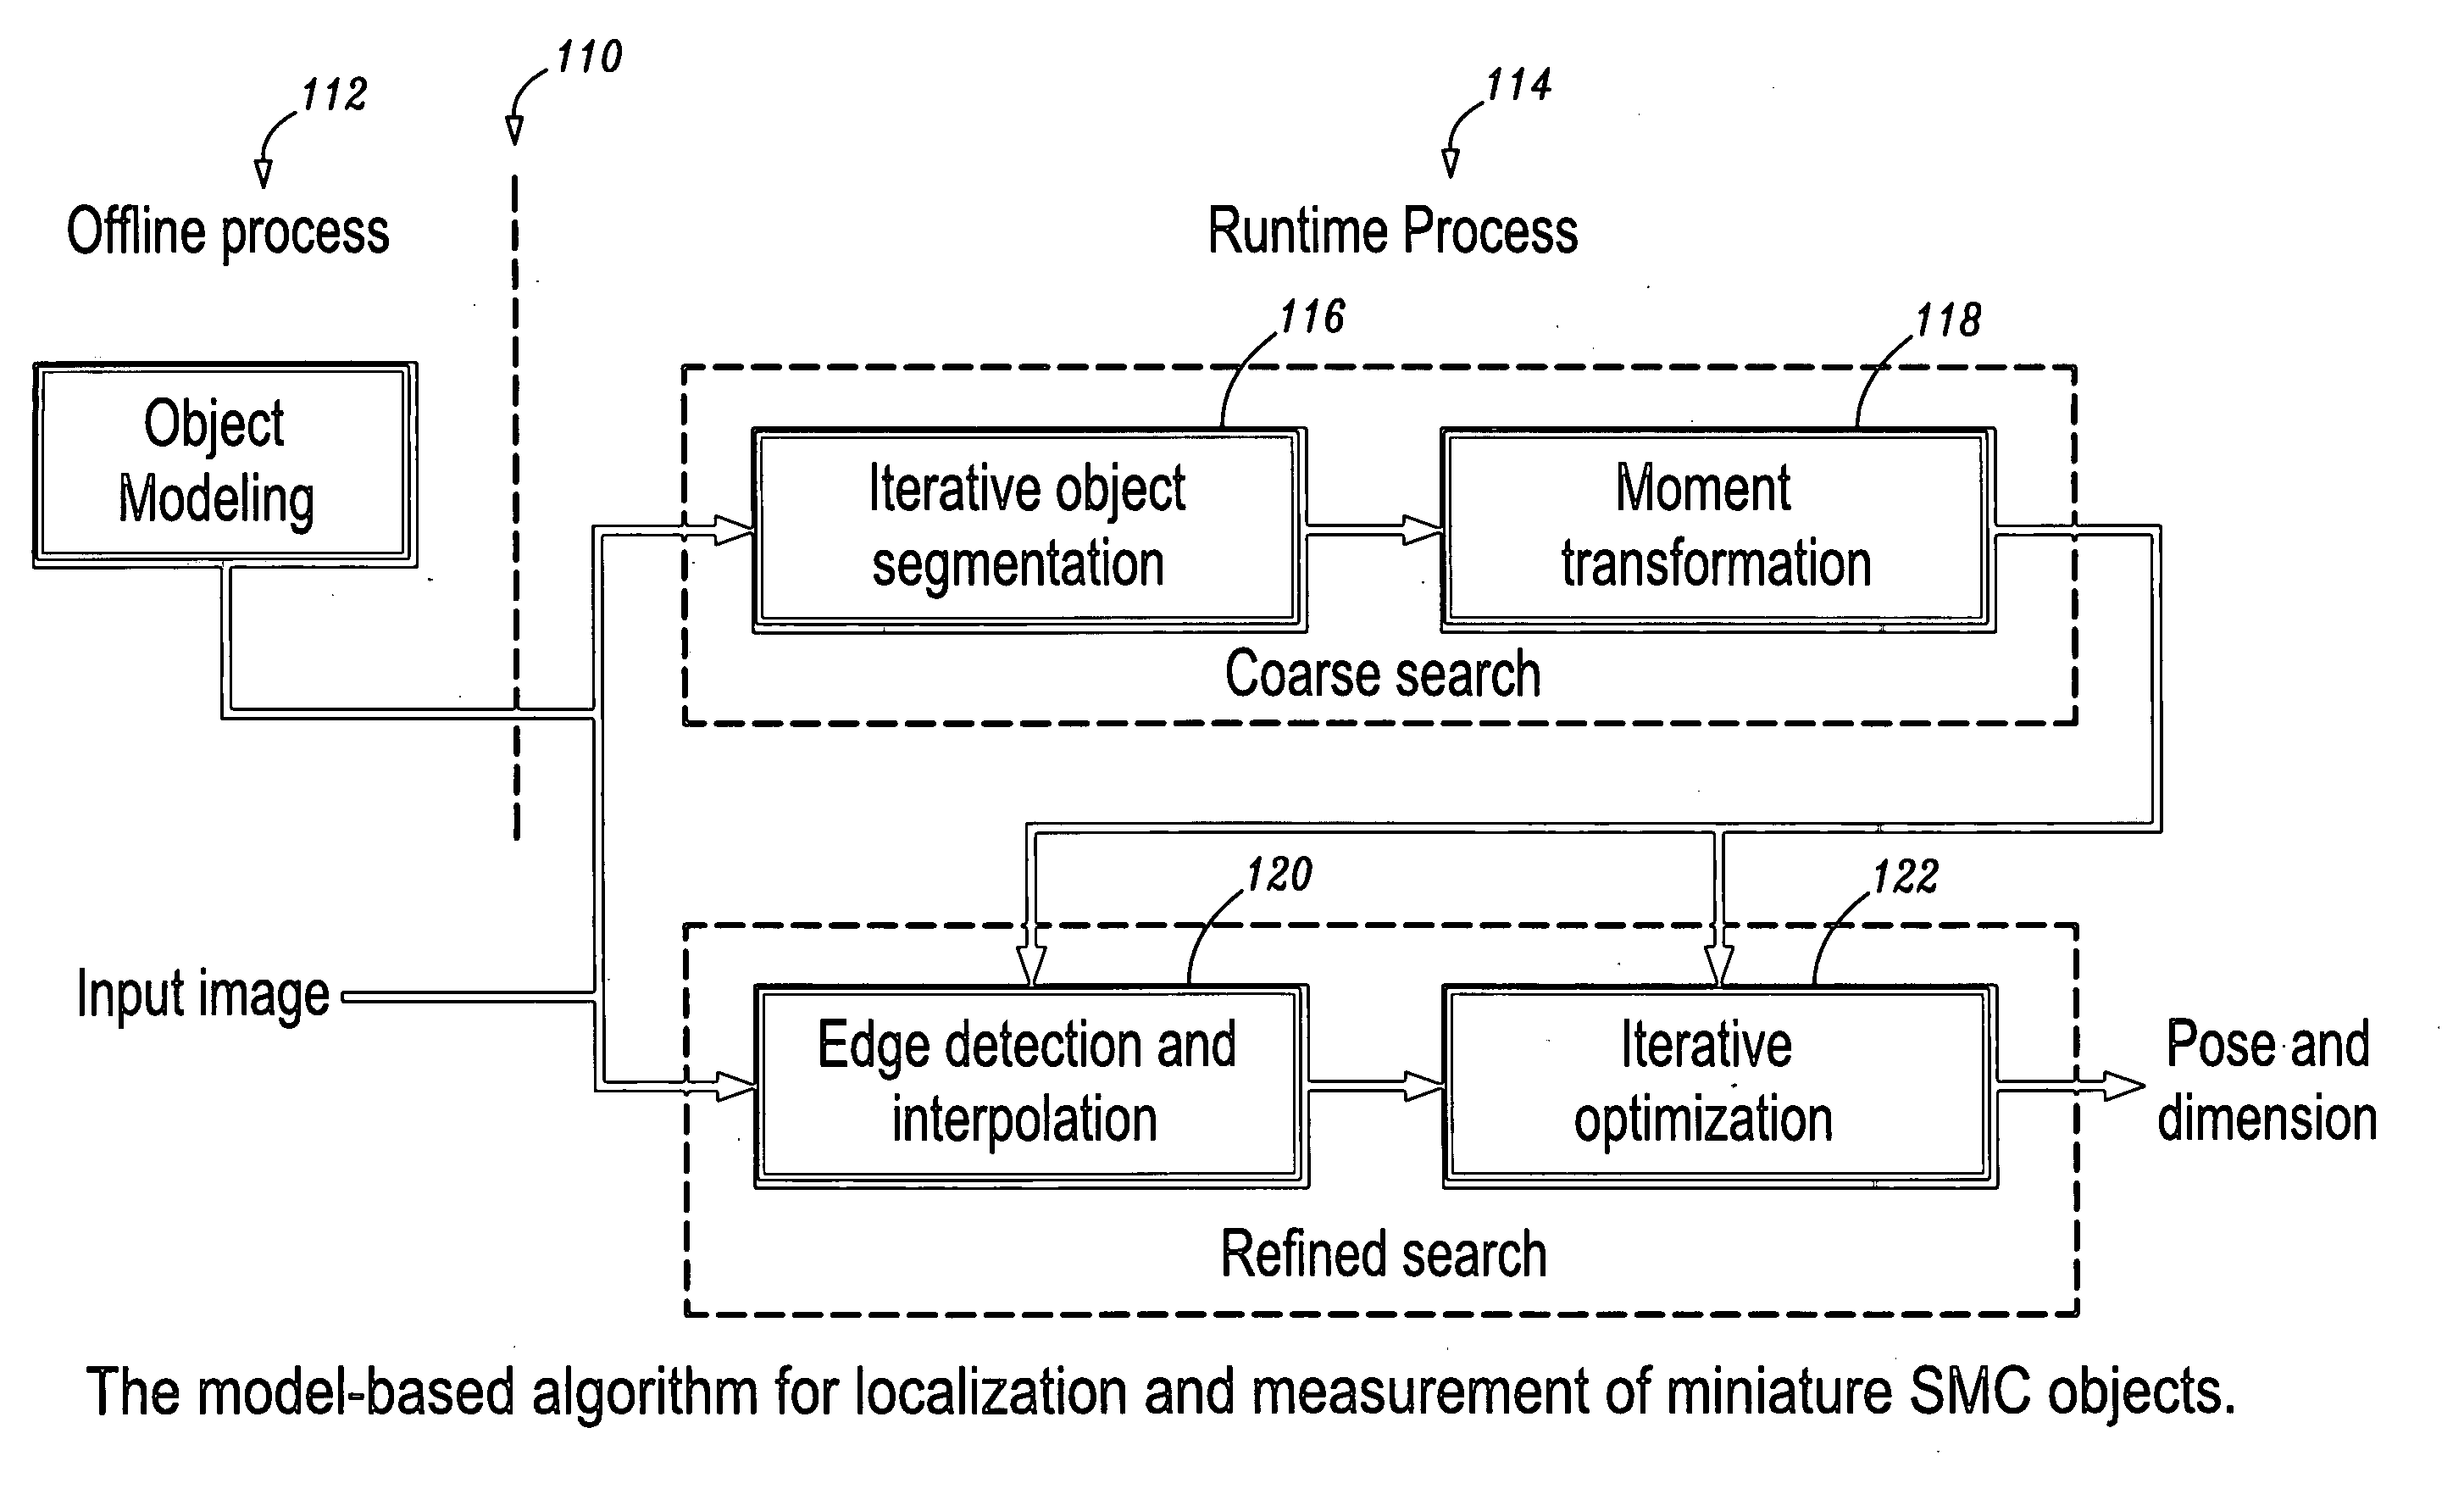 Model-based localization and measurement of miniature surface mount components